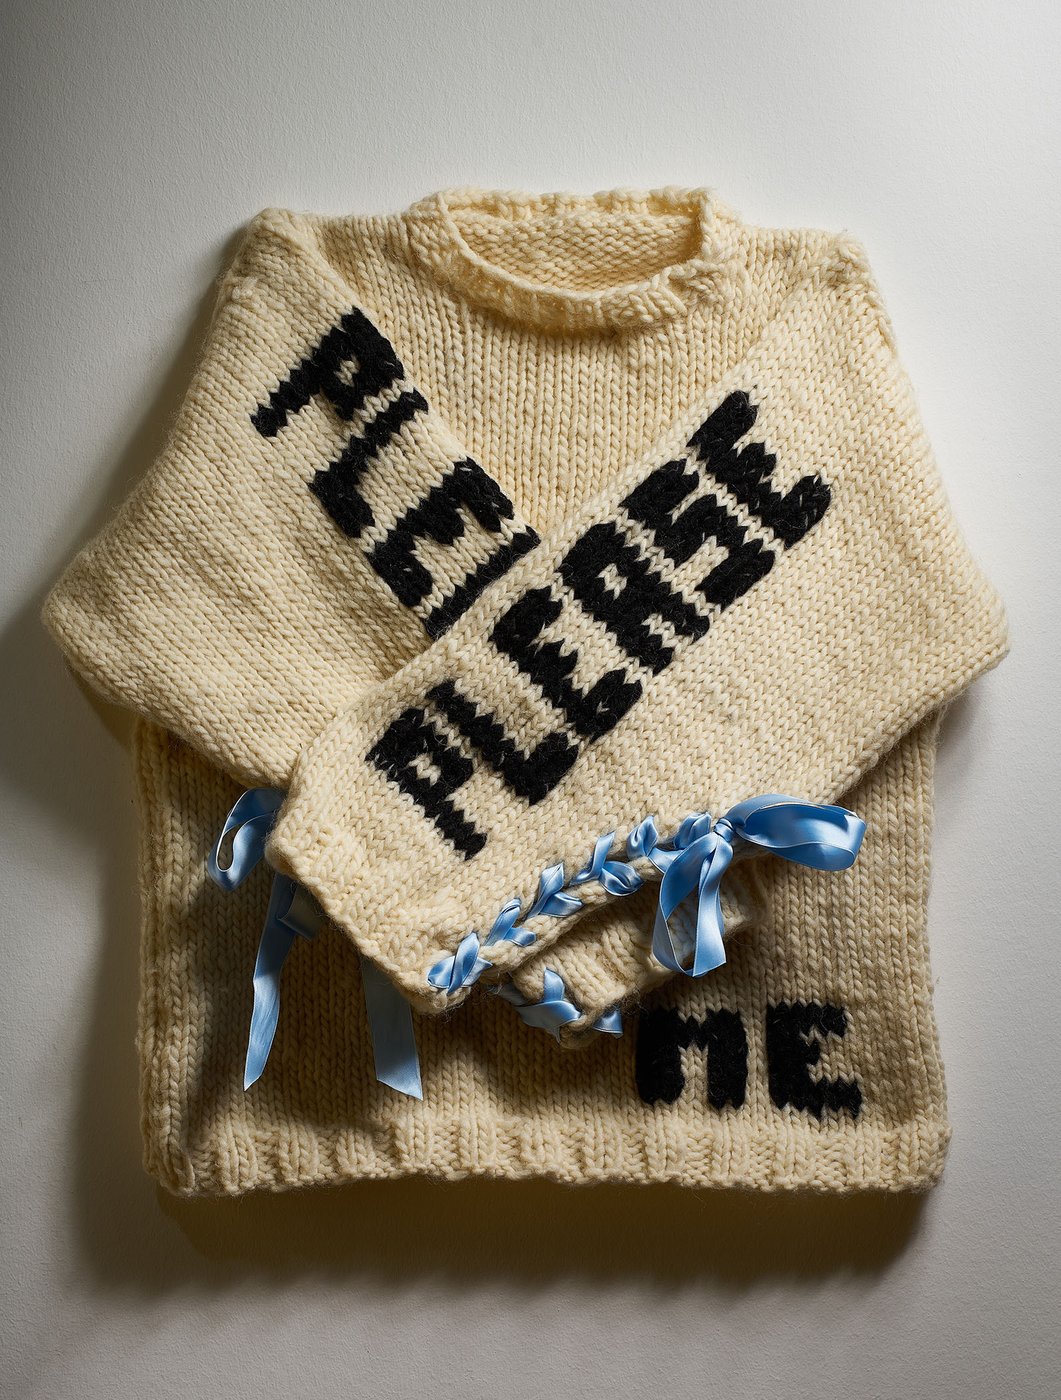 Seen is a cream-colored knit sweater with crossed arms. On each sleeve is embroidered the word "please", at the bottom – the word "me" (= please please me). On the sides the sleeves are decorated with blue ribbons.